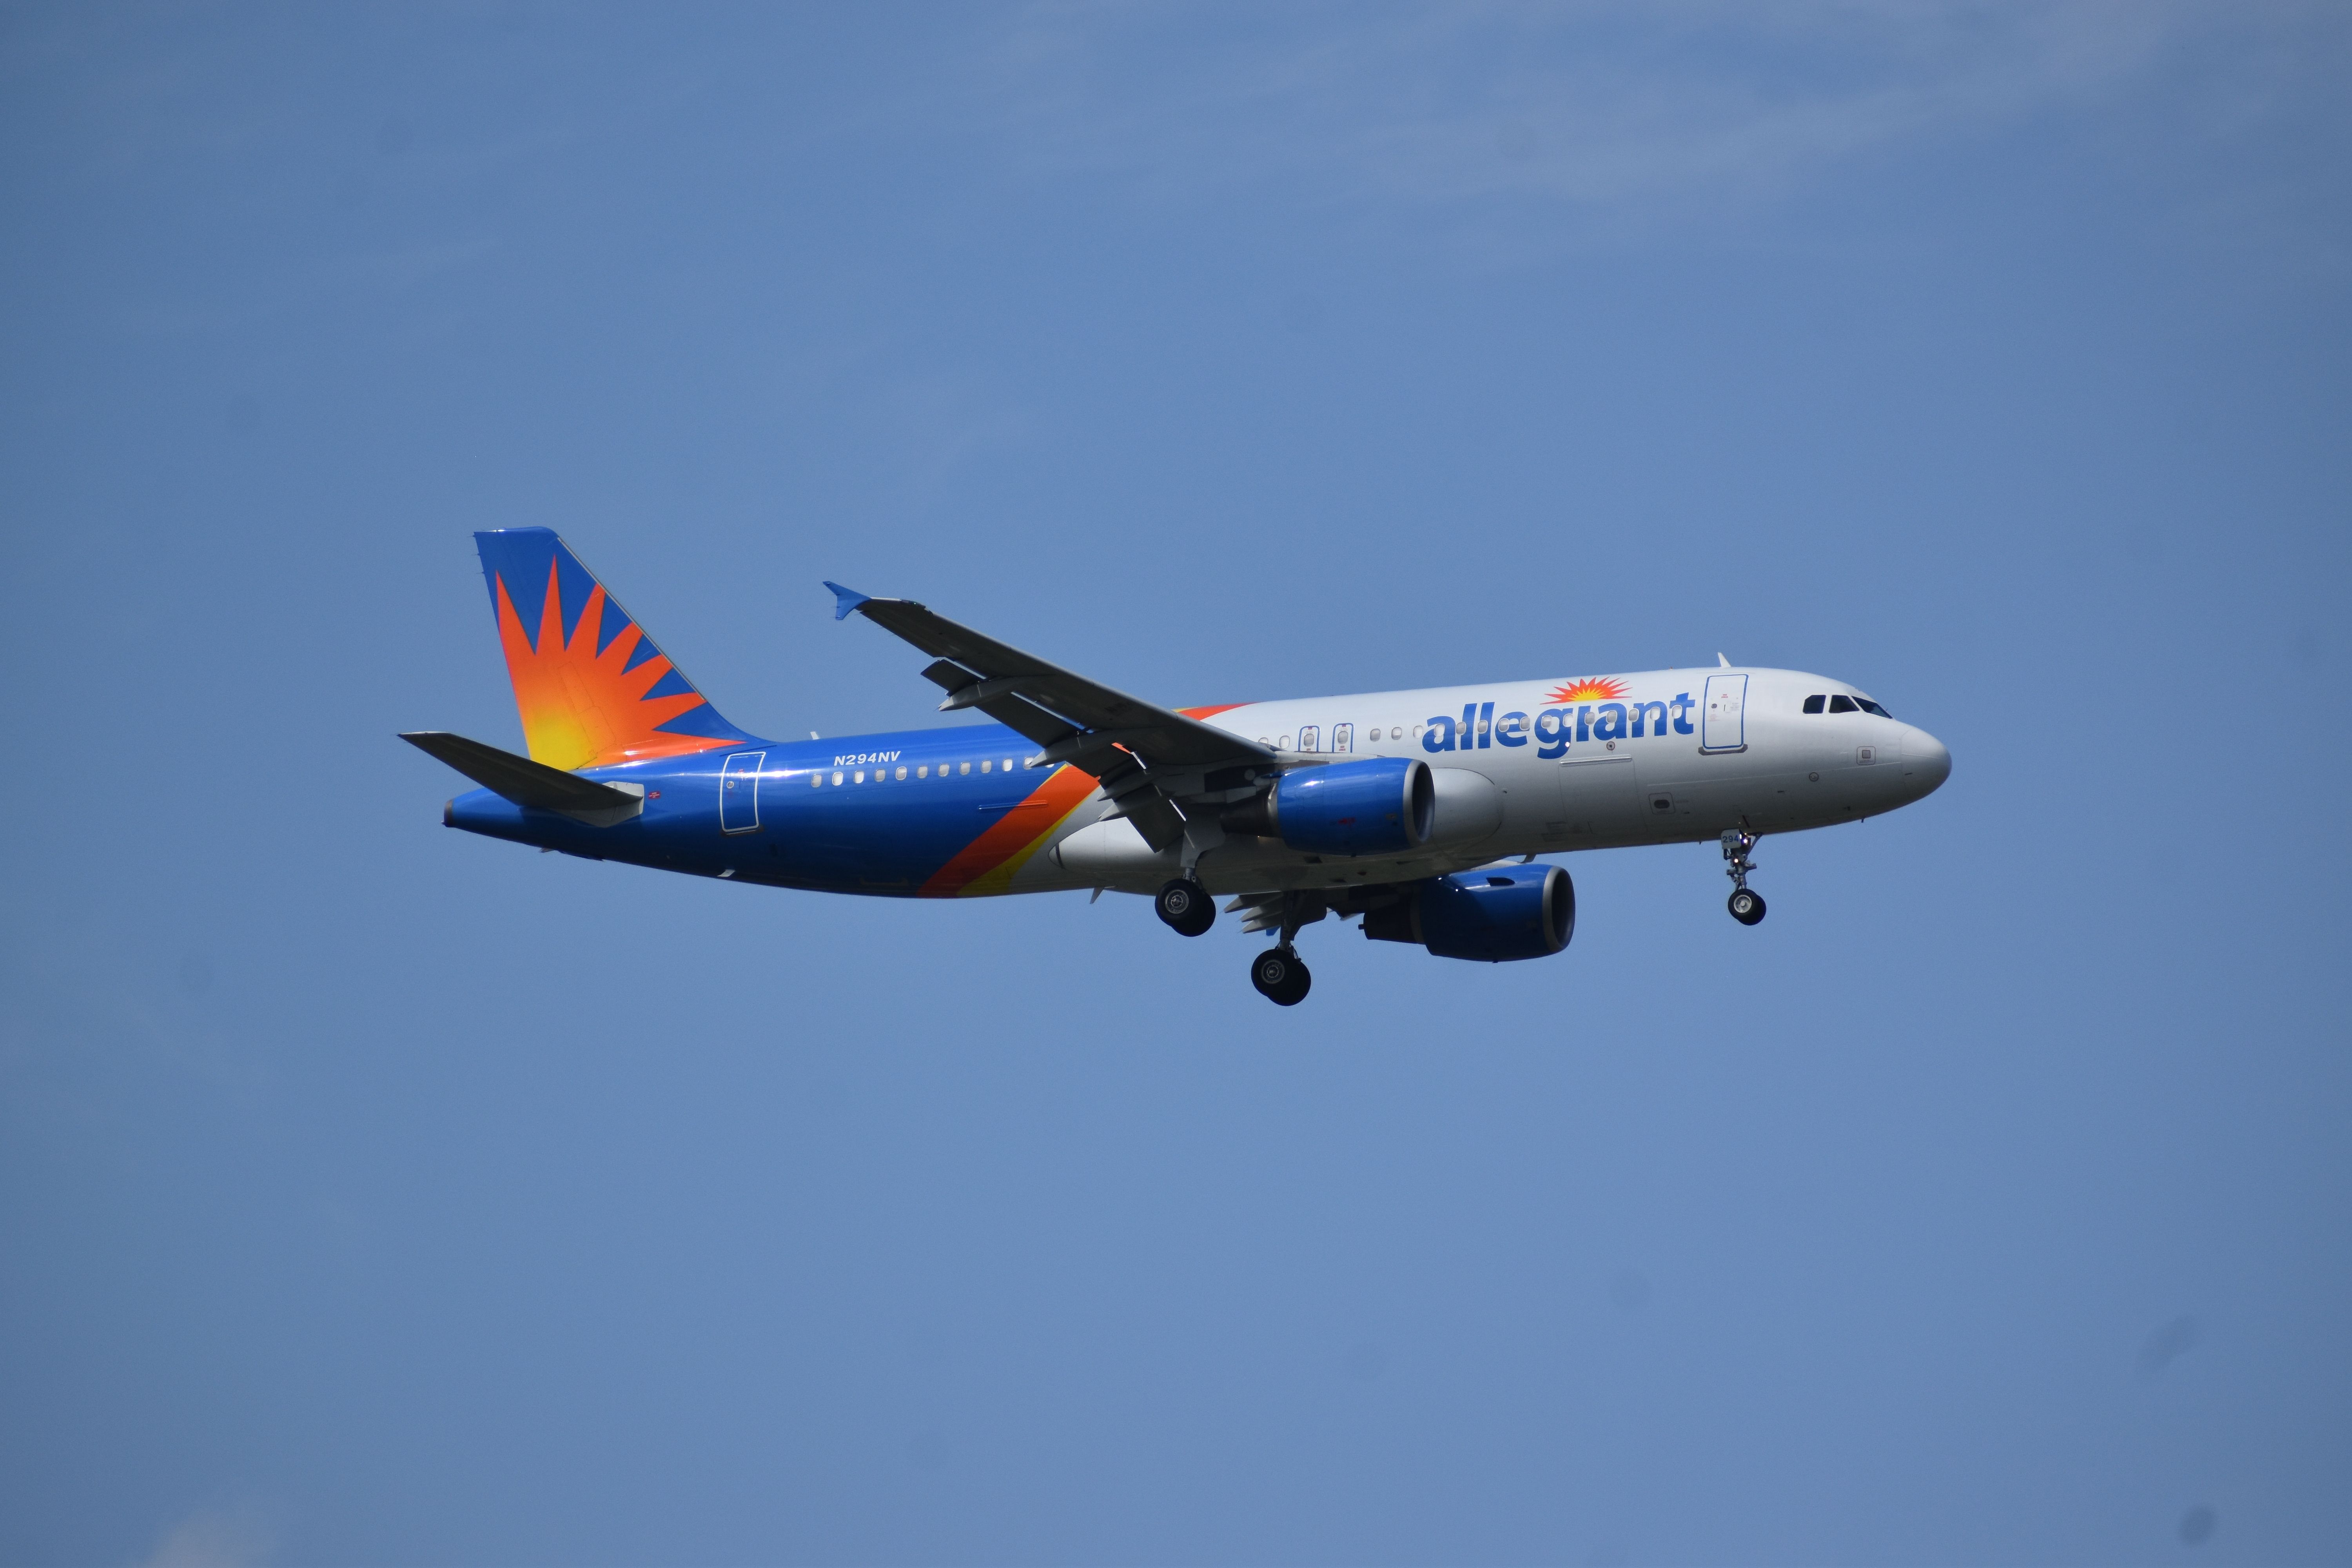 Allegiant Air Airbus A320 landing at Houston Hobby Airport.